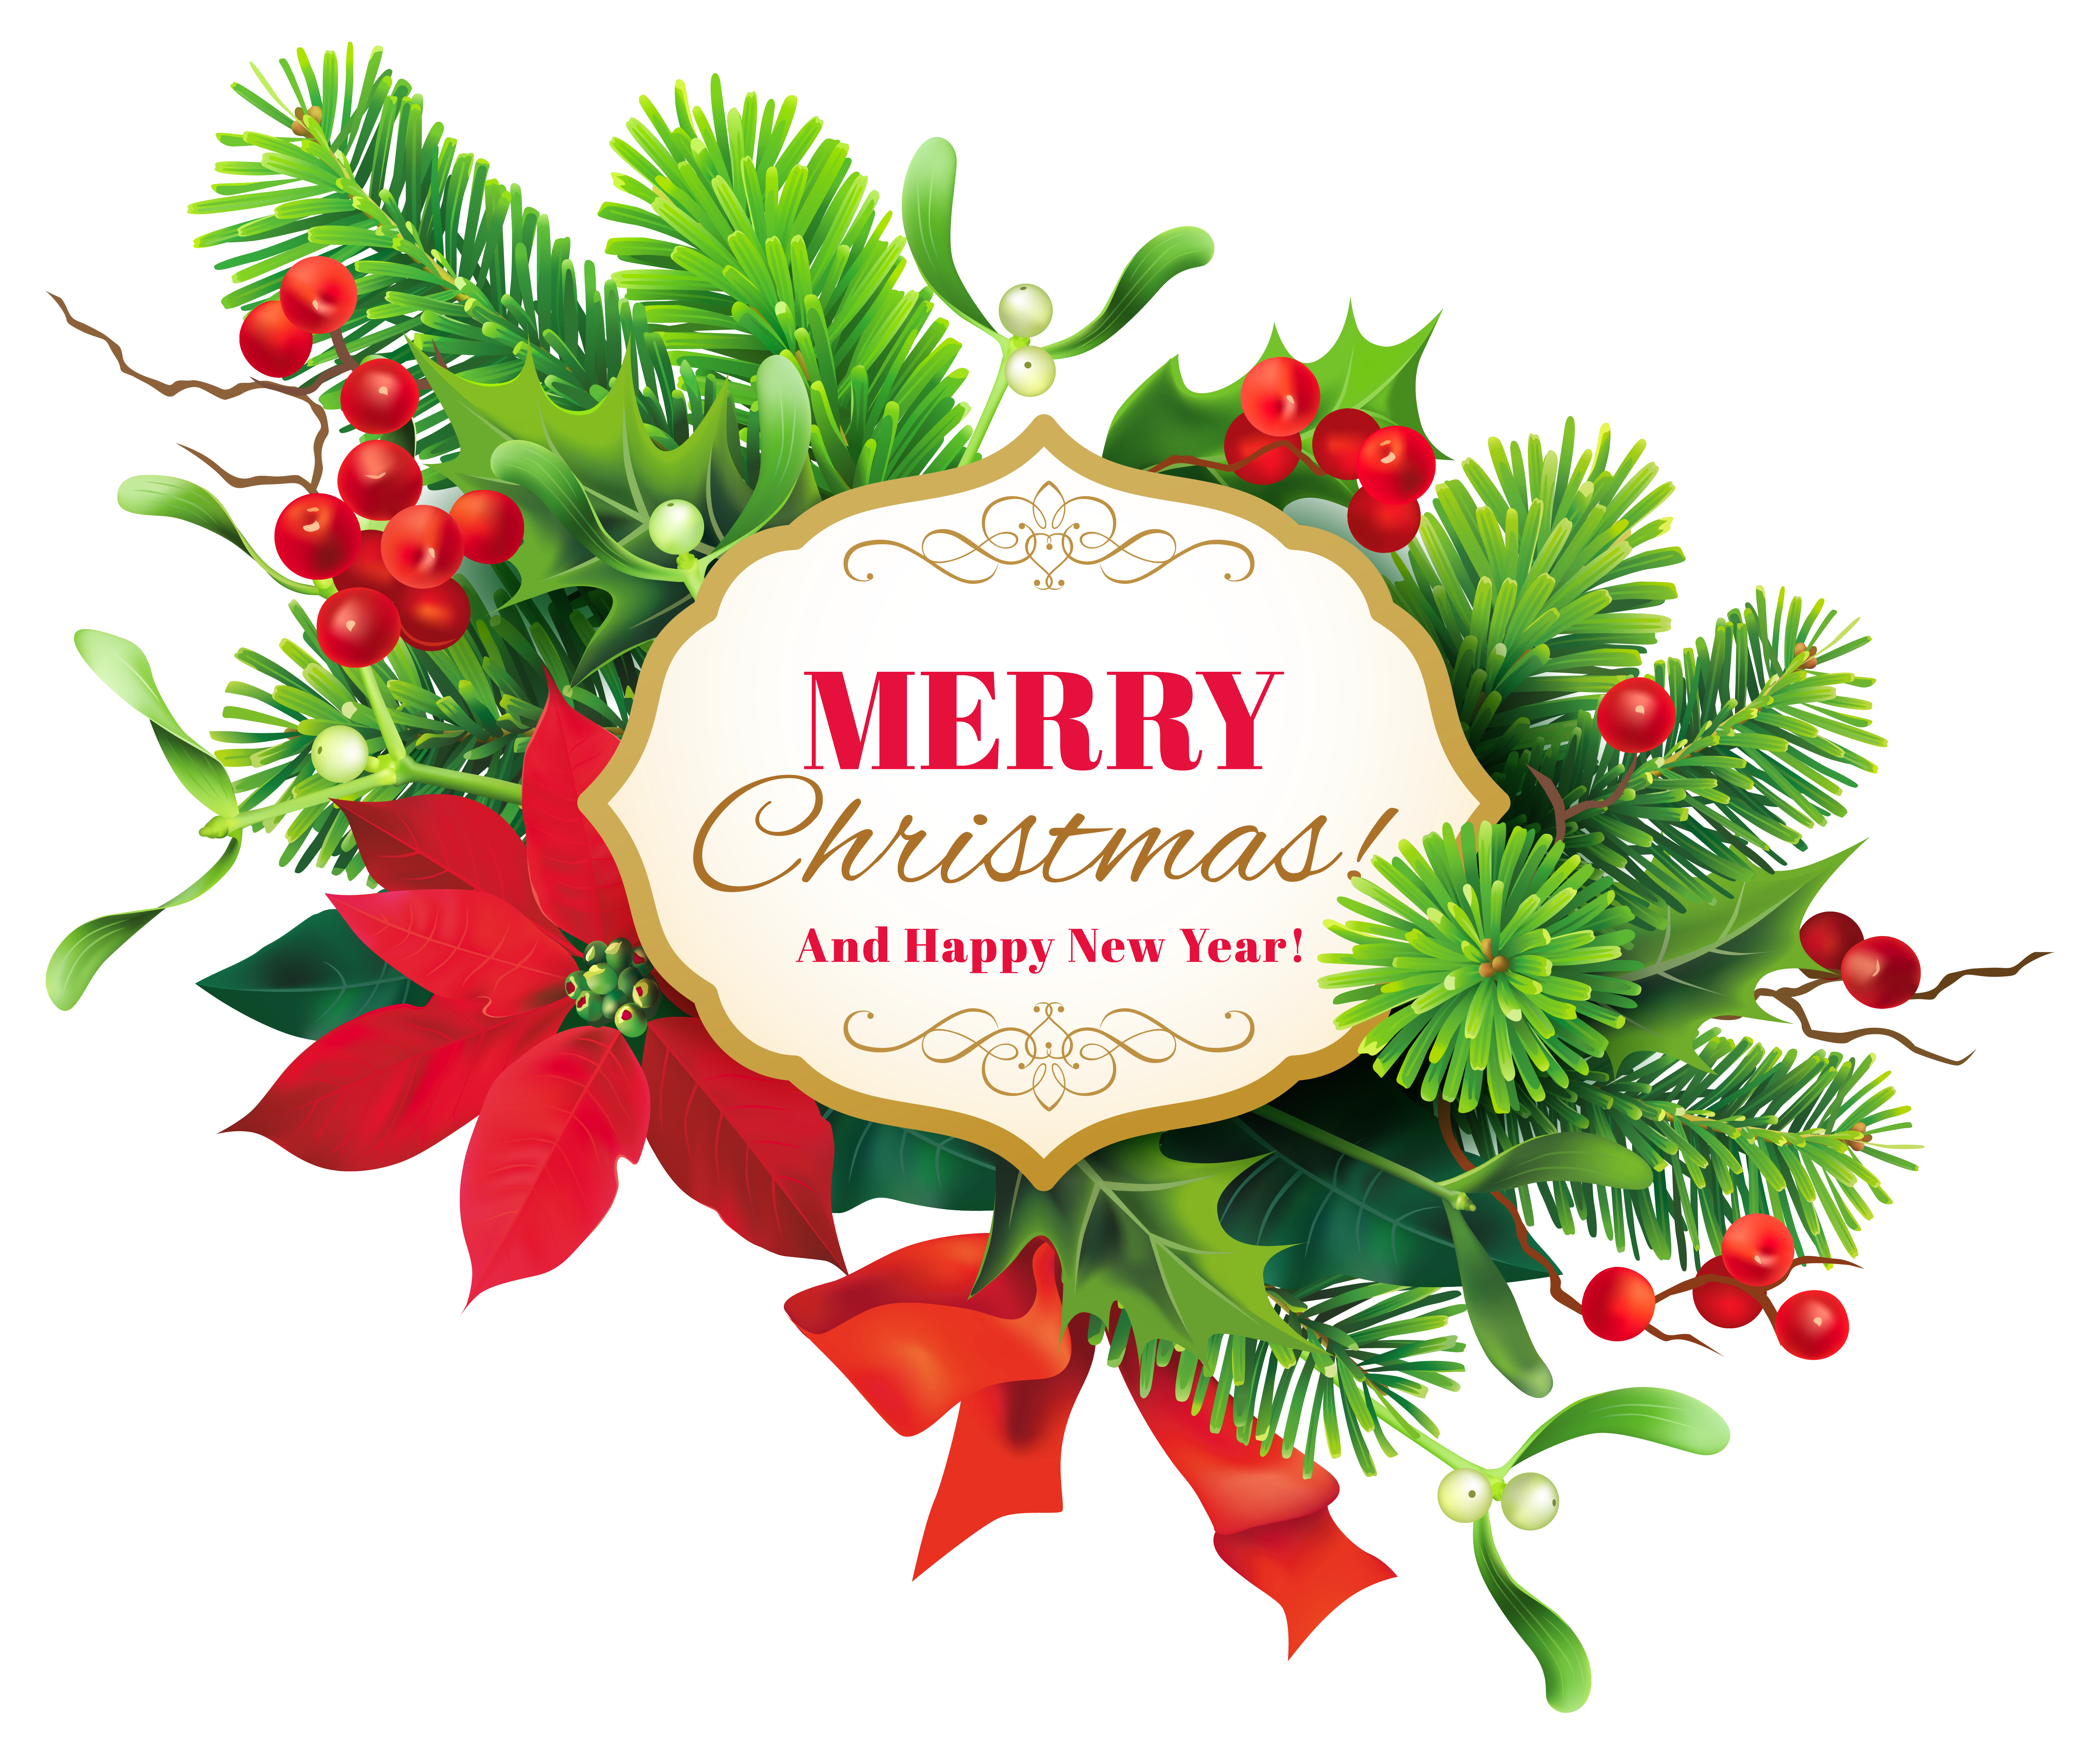 merry christmas clip art free download - photo #15